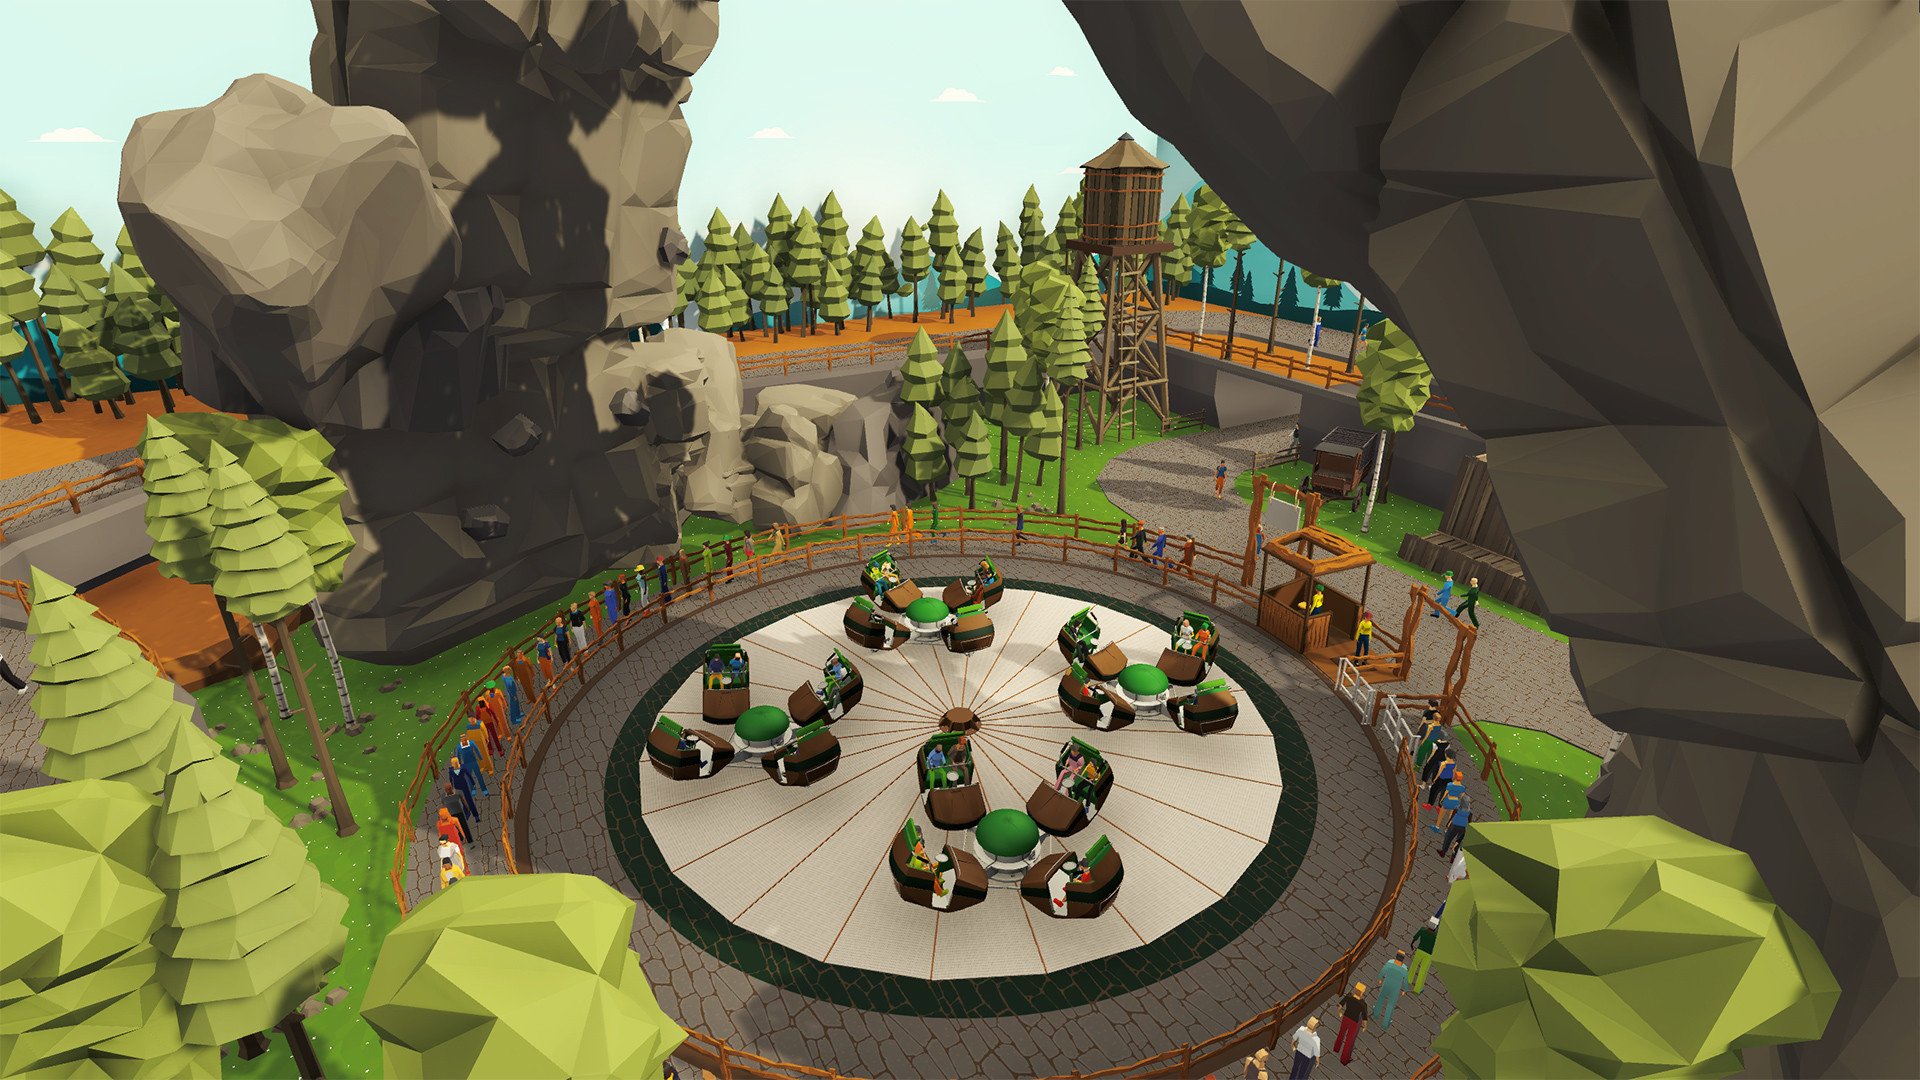 Indoorlands PC Review: Simple Yet Challenging Park Management Simulator